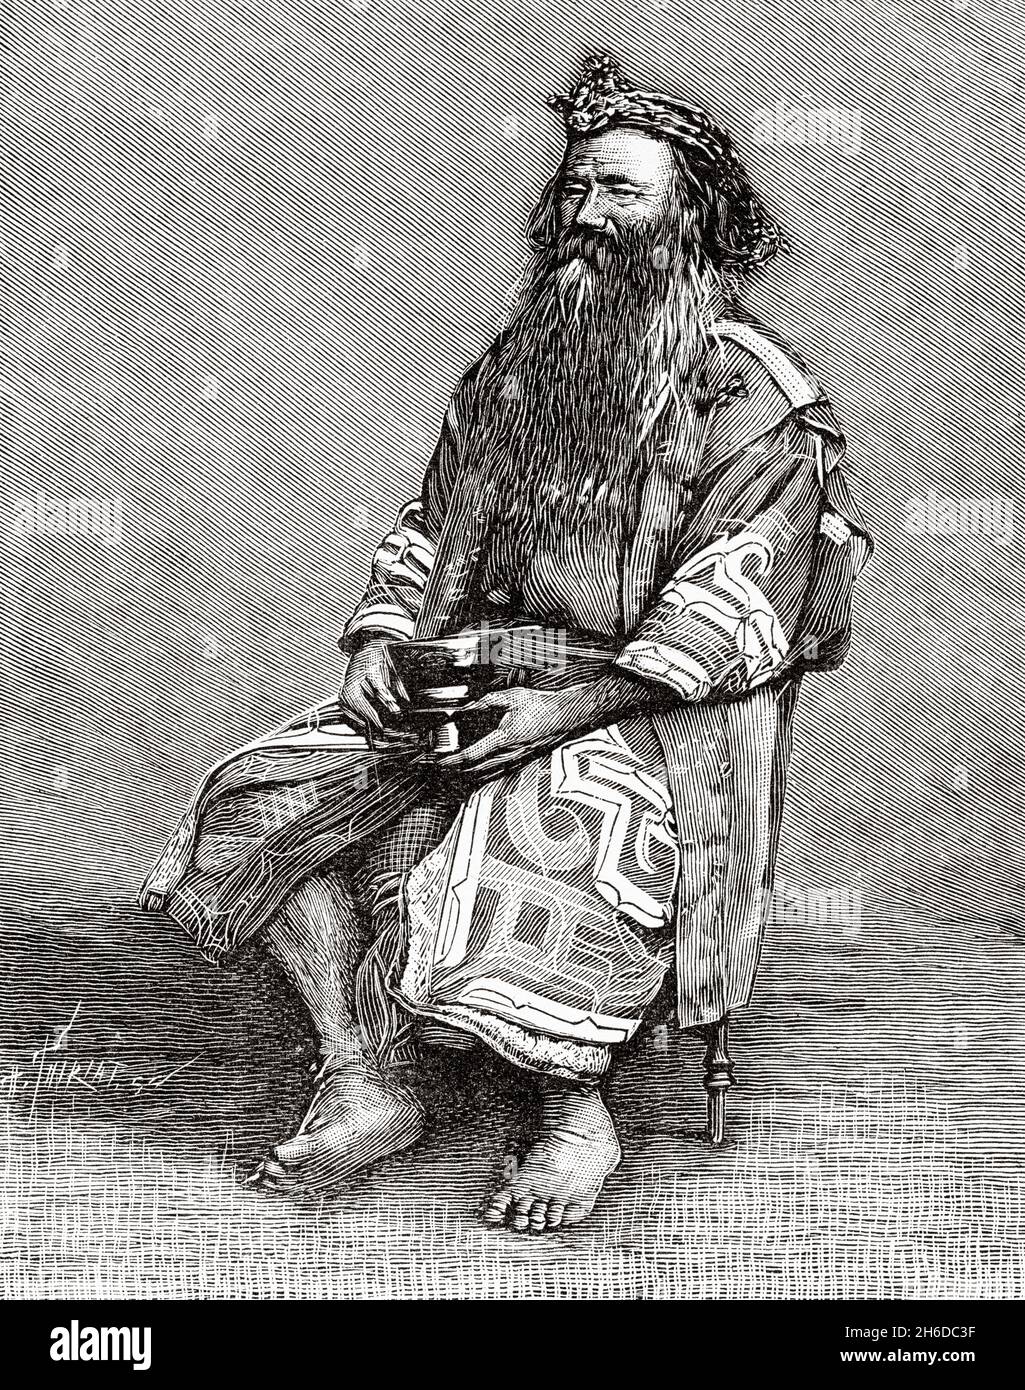 The Ainus. Ainos are an ethnic group indigenous to Hokkaido and northern Honshu, in the northern part of Japan, as well as the Kuril Islands and the southern half of the island of Sakhalin in Russia. They are also known as ezo or yezo, Japan, Asia. Old 19th century engraved illustration from La Nature 1897 Stock Photo